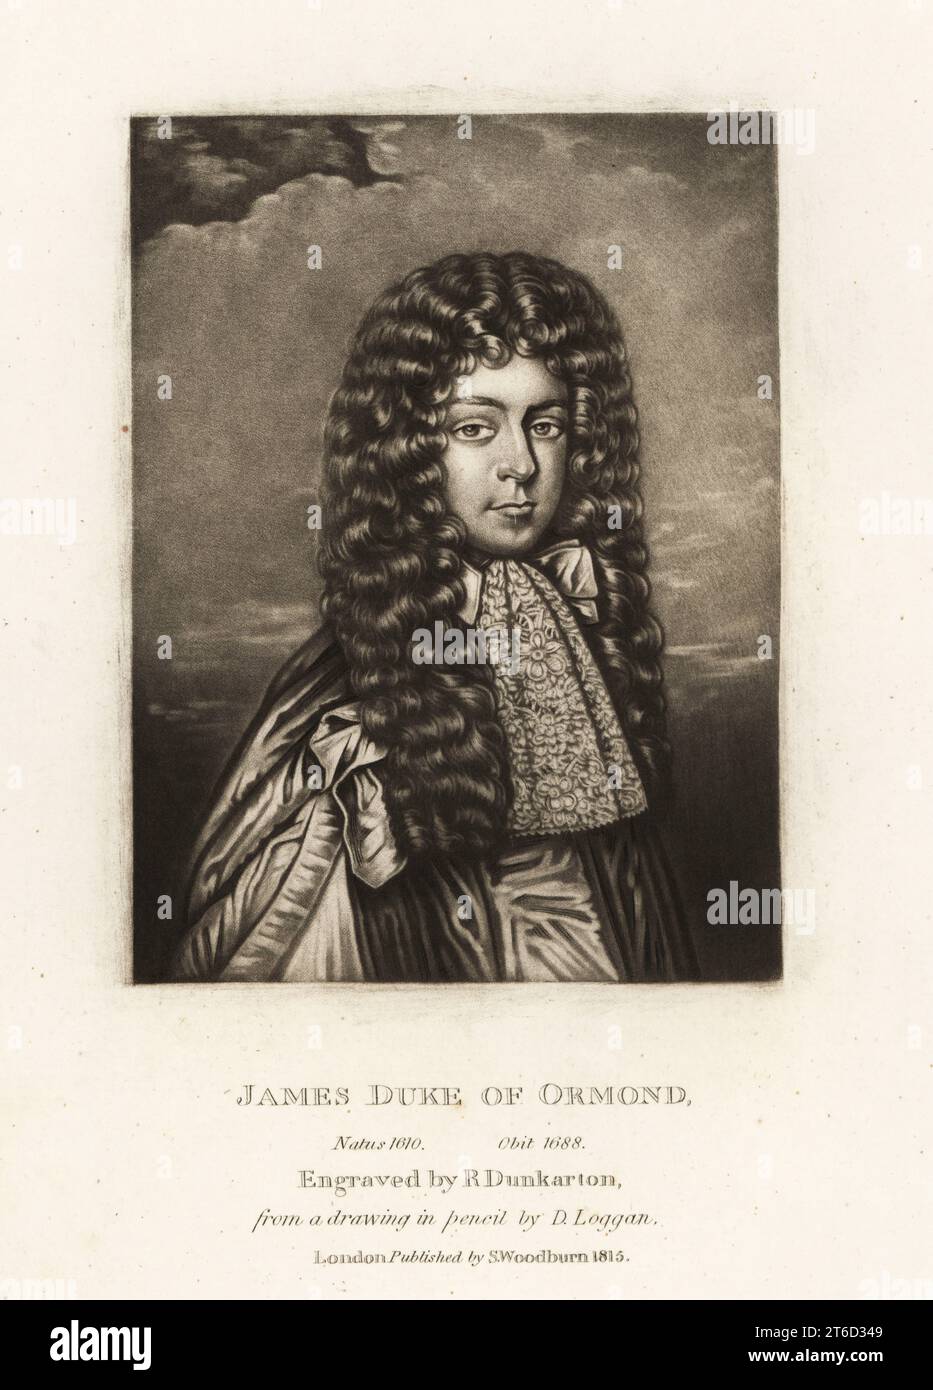 Lieutenant-General James FitzThomas Butler, 1st Duke of Ormonde, 16101688. Irish statesman and Royalist soldier, known as Earl of Ormond and Marquess of Ormond. Mezzotint engraving by Robert Dunkarton after a pencil drawing by David Loggan from Richard Earlom and Charles Turner's Portraits of Characters Illustrious in British History Engraved in Mezzotinto, published by S. Woodburn, London, 1815. Stock Photo